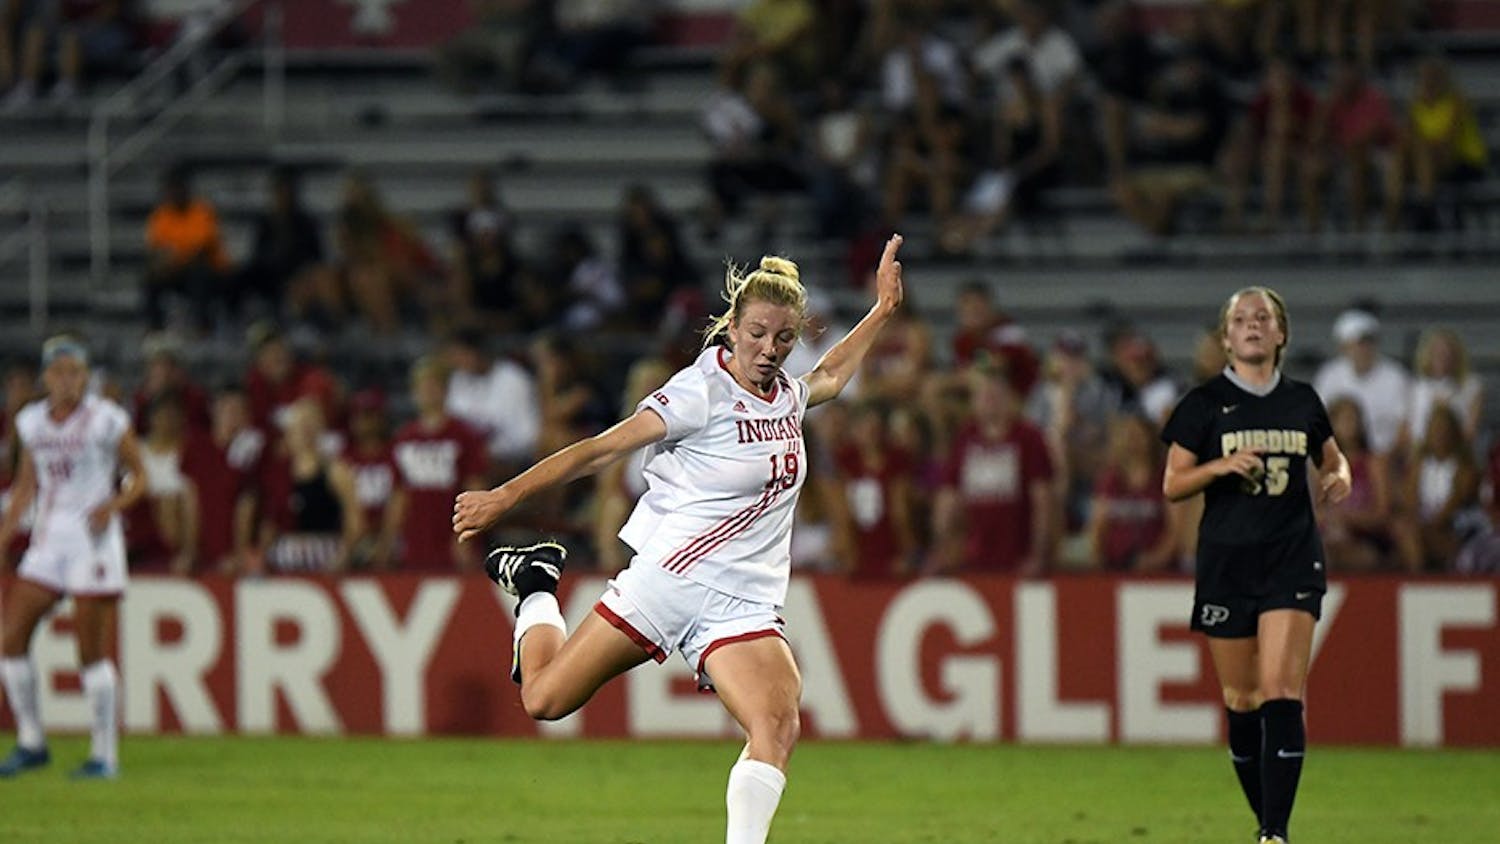 Sophomore midfielder Chandra Davidson kicks the ball against Purdue on Sept. 23 at Bill Armstrong Stadium. Davidson had four shots in IU's 1-1 tie with Purdue.